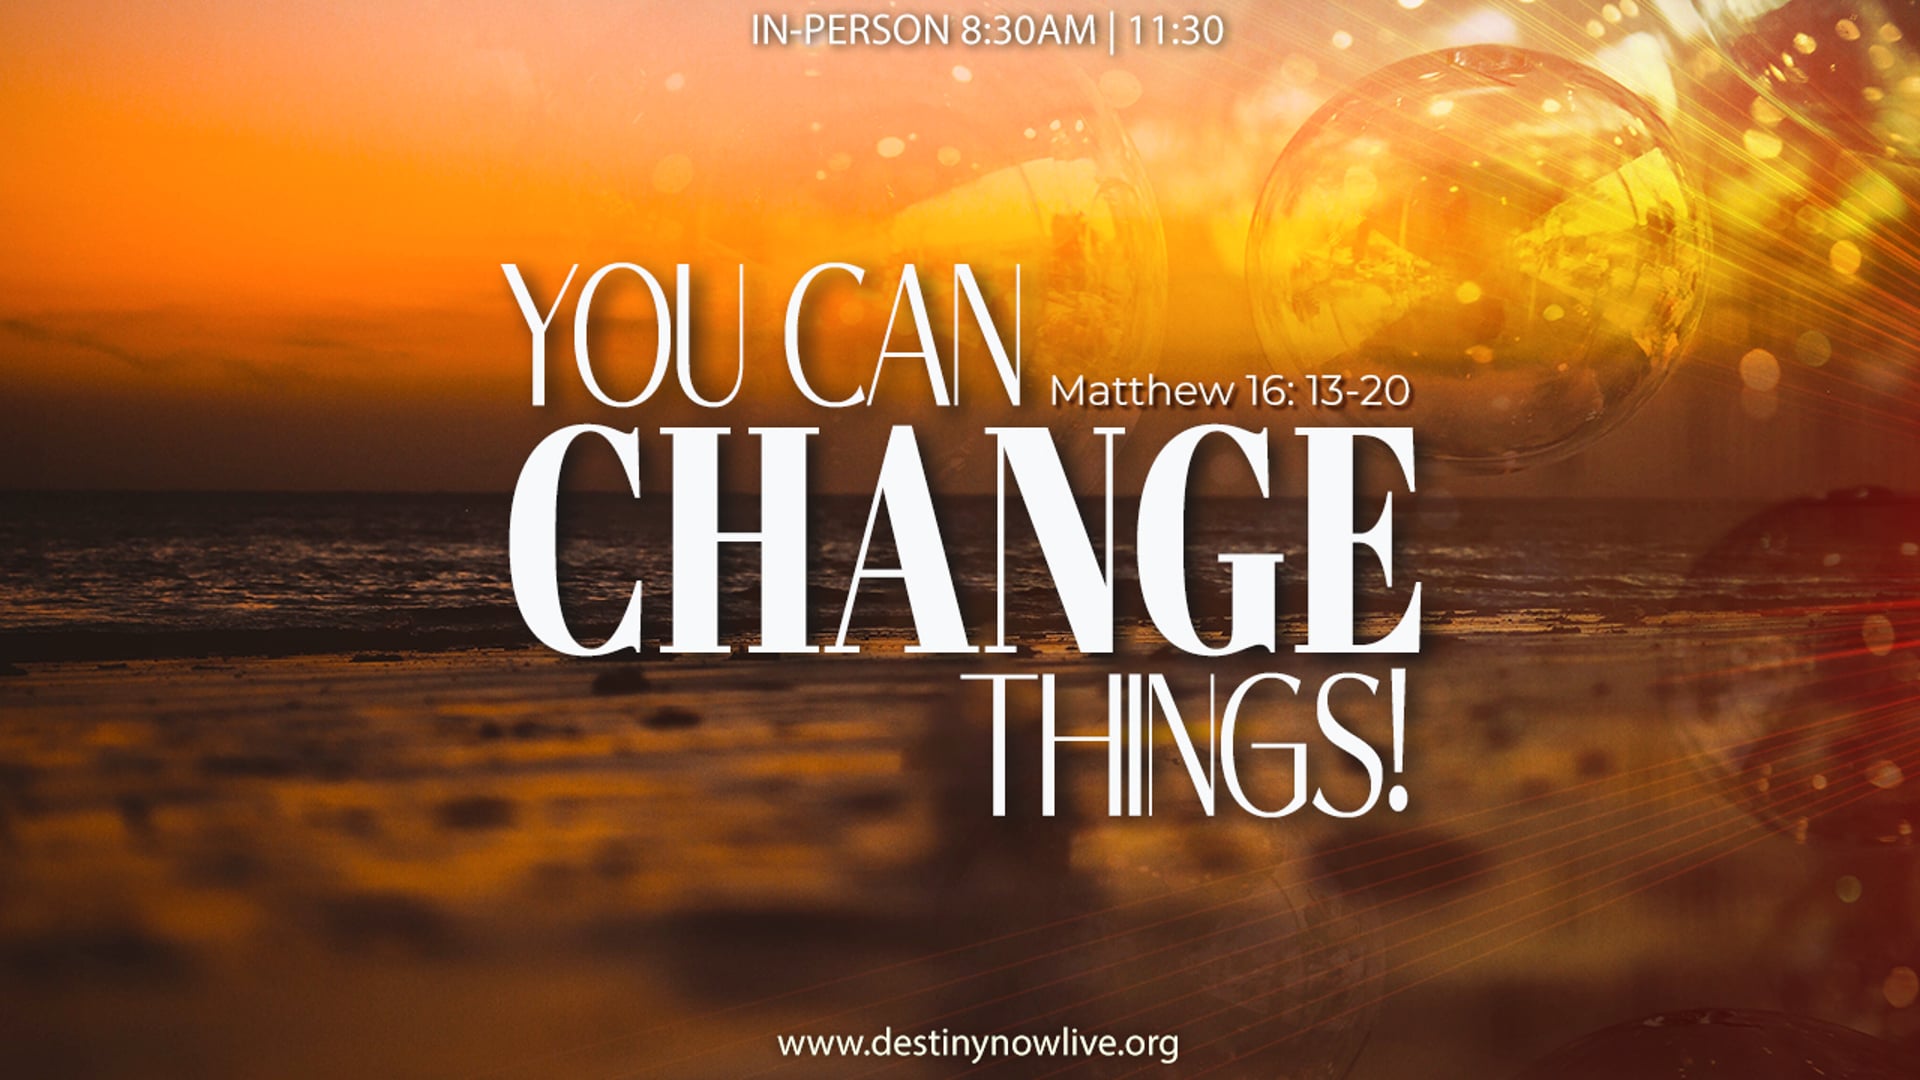 "You can CHANGE things" - Online Giving: Text to Give - 910-460-3377 - Give Online @ www.destinynow.org